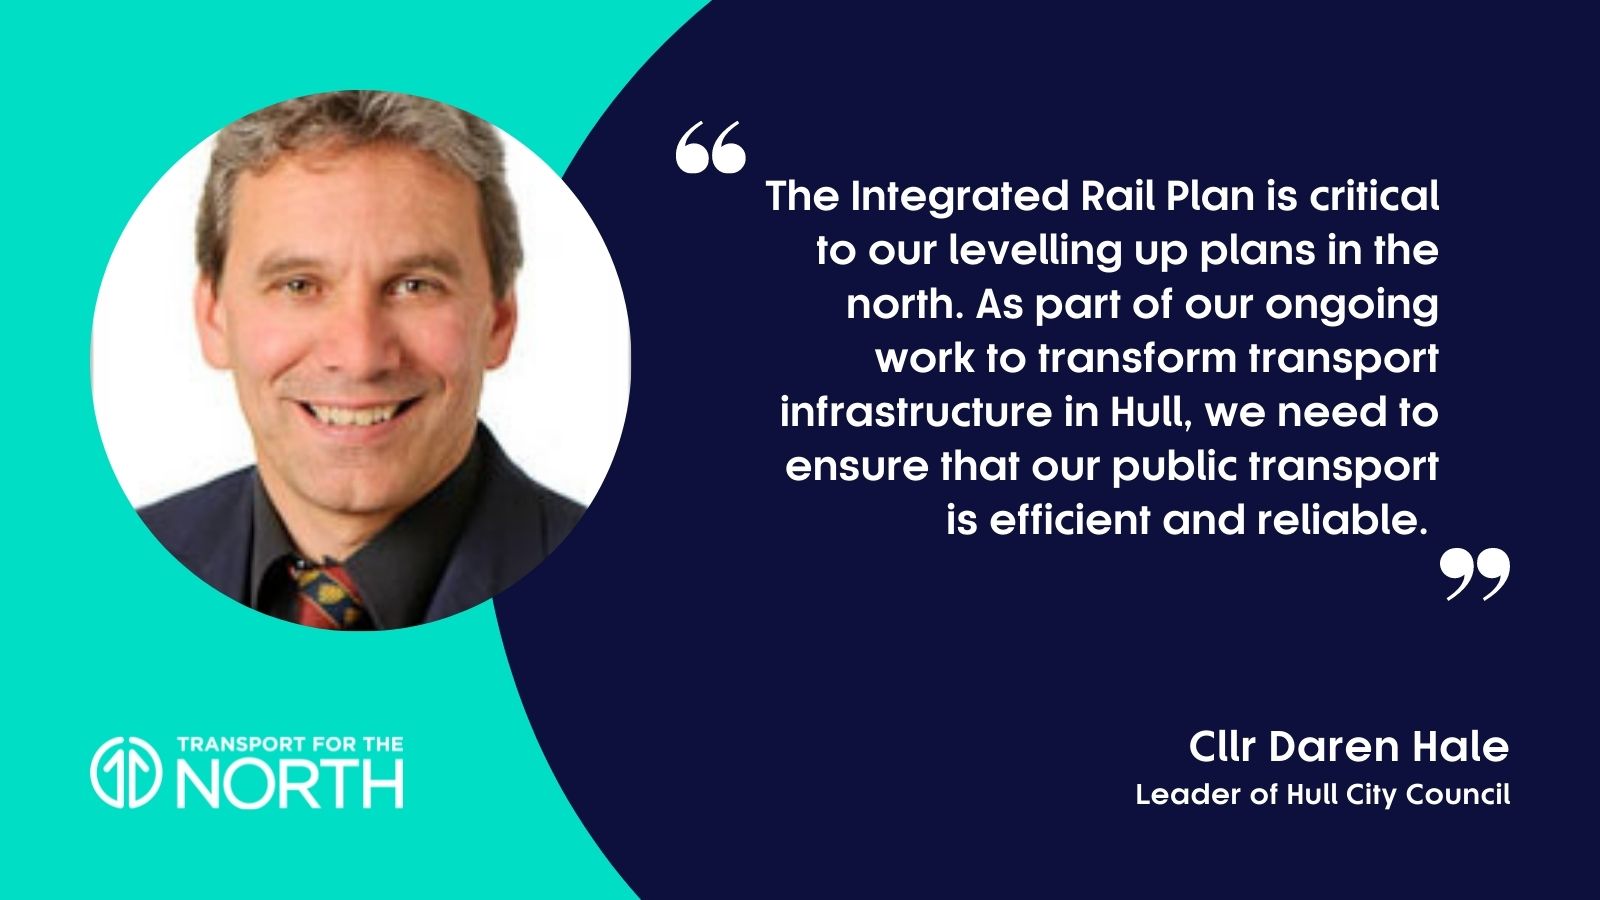 Councillor Daren Hale, leader of Hull City Council, on the integrated Rail Plan